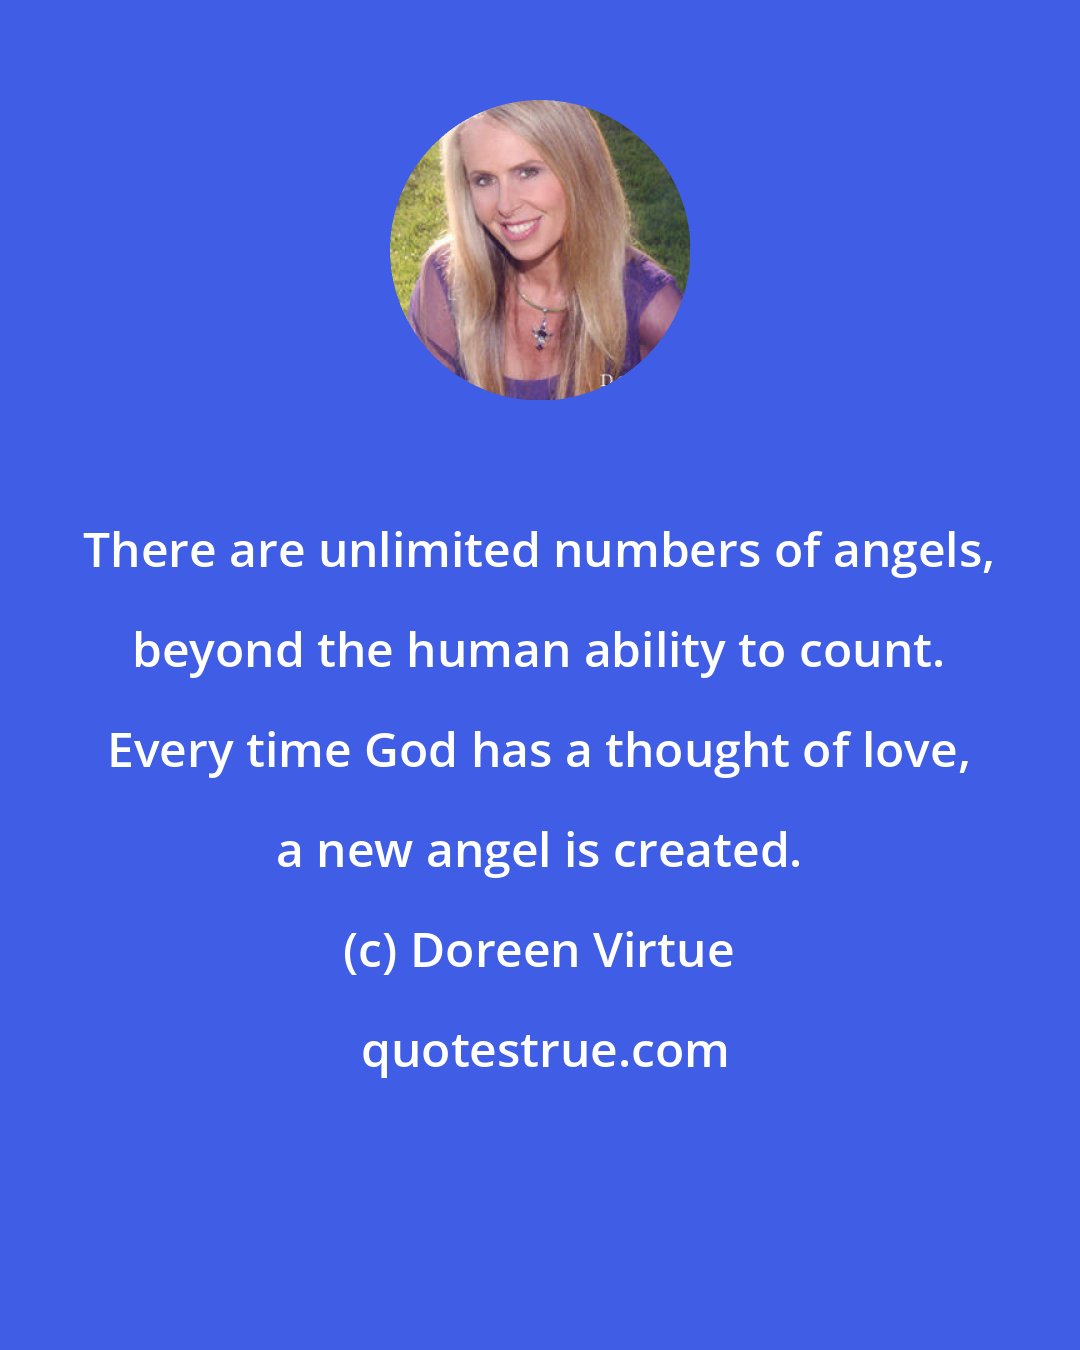 Doreen Virtue: There are unlimited numbers of angels, beyond the human ability to count. Every time God has a thought of love, a new angel is created.